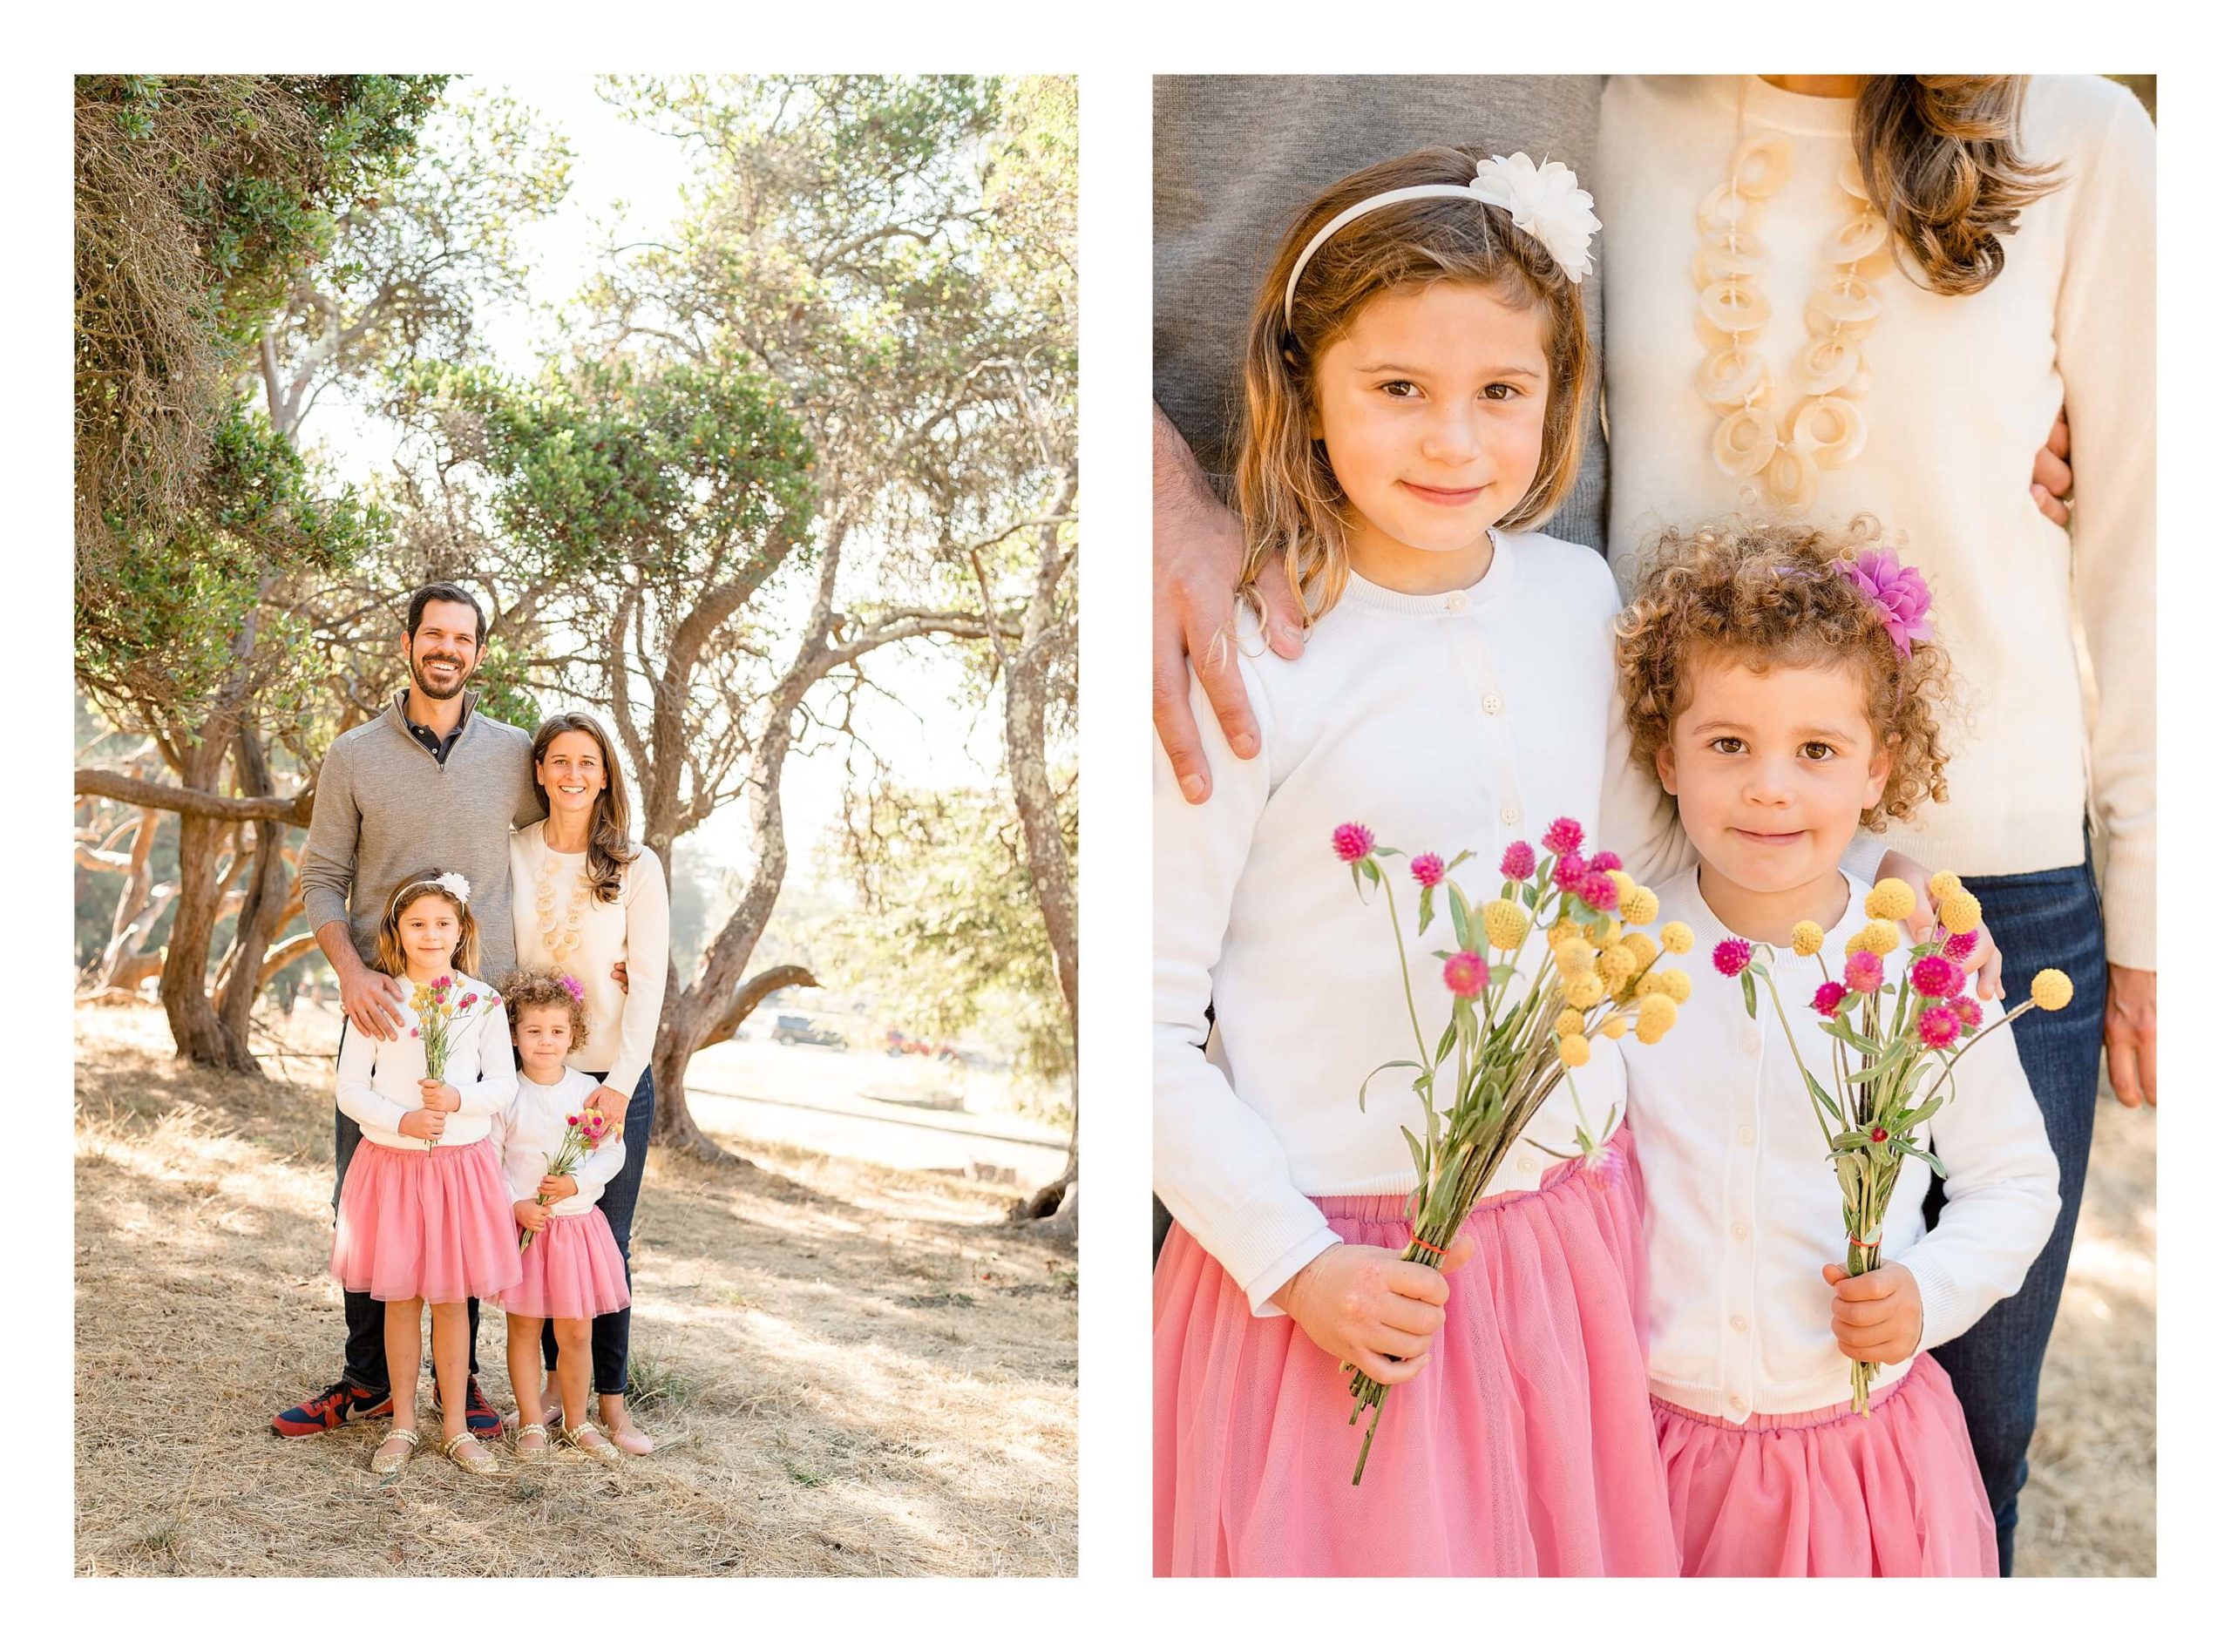 Left: A family of four smiles at the camera. The two little girls wear bight pink tutus and each hold a small bouquet of yellow and pink flowers. Right: Two sisters smile at the camera. They are wearing floral headbands, white sweaters, and fluffy tutus. They hold bouncy bouquets of yellow and pink flowers. Their parents stand behind them.